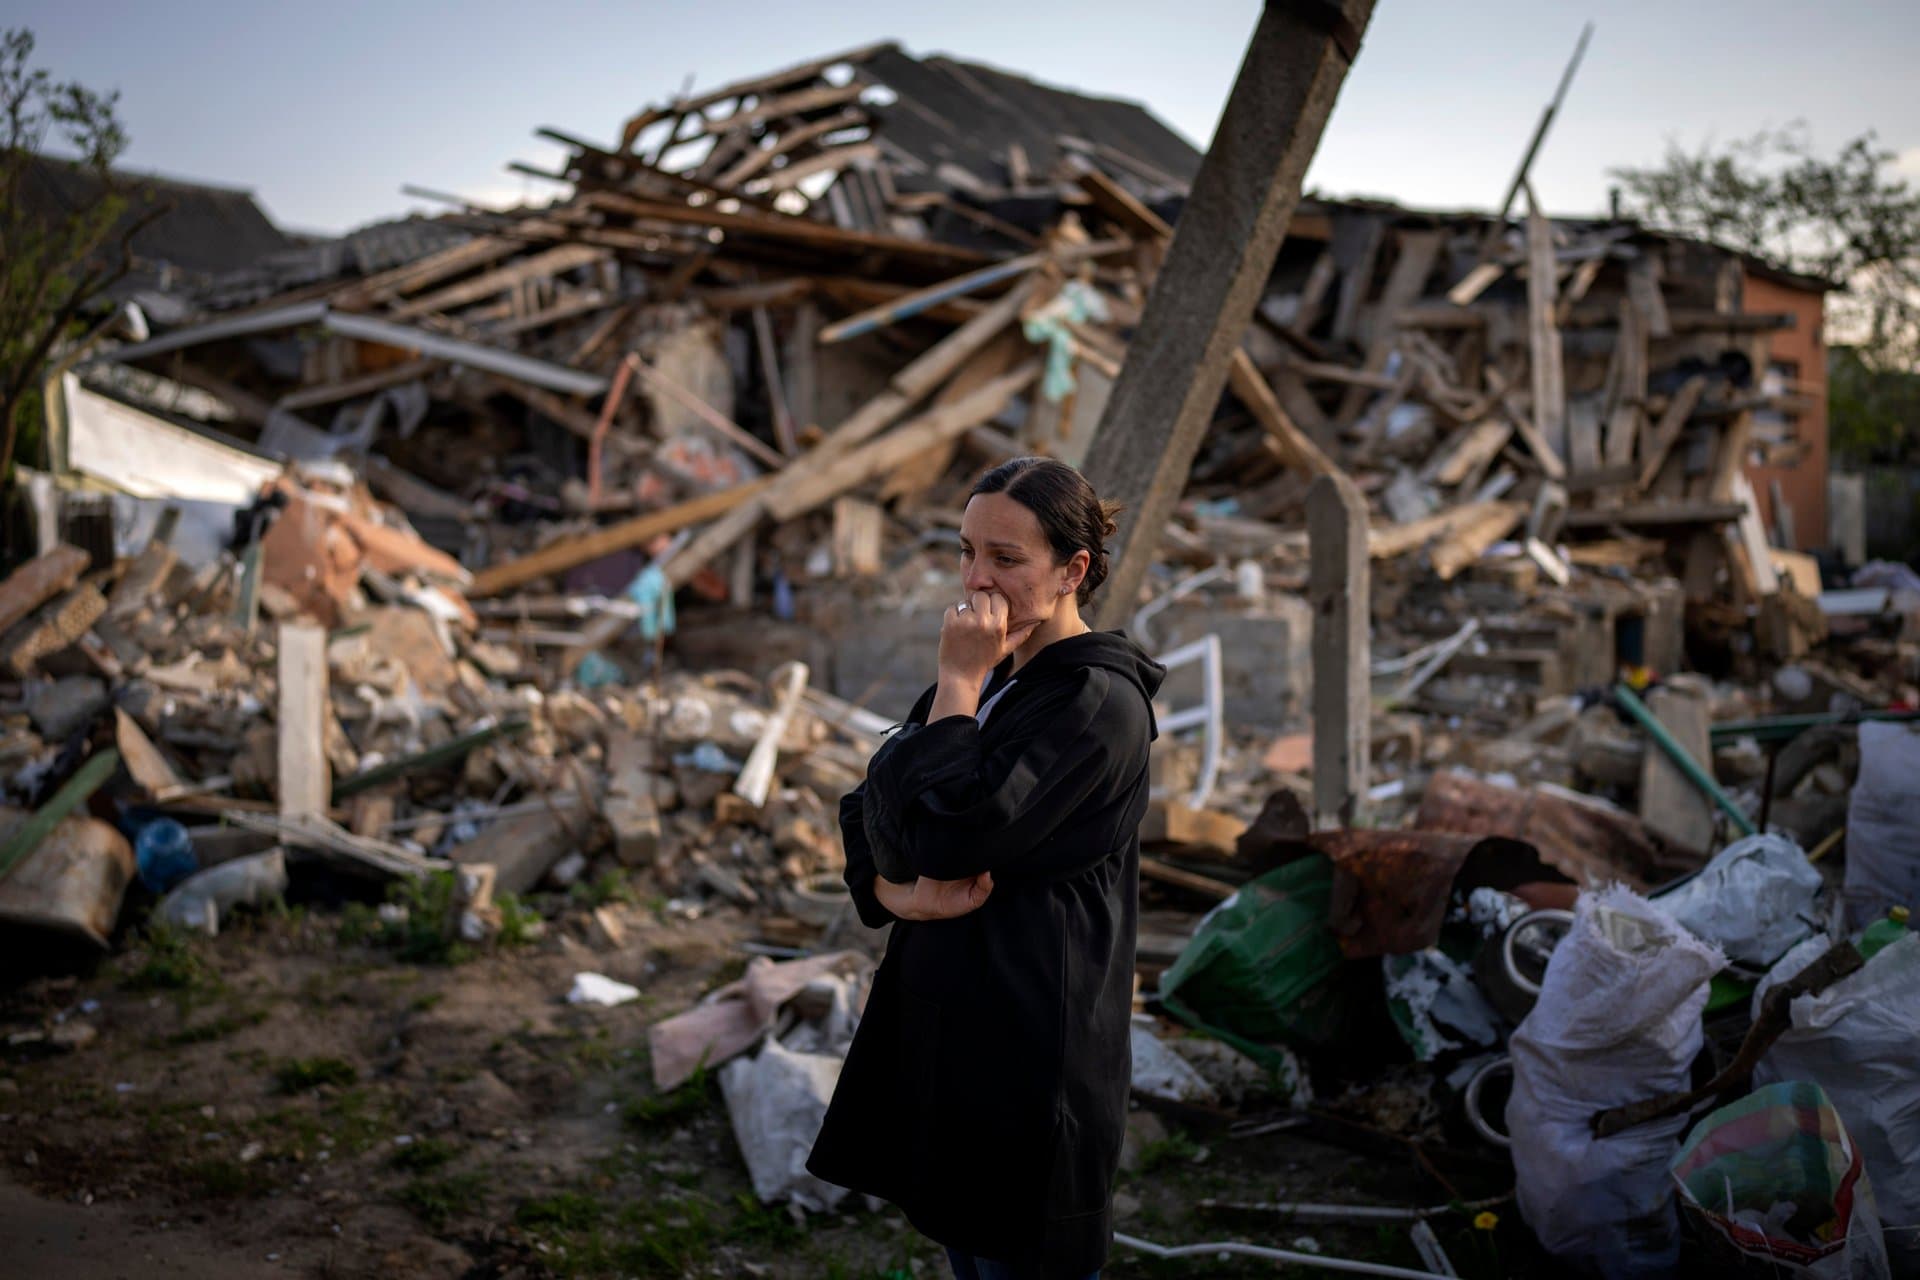 Anna Shevchenko reacts next to her home in Irpin completely destroyed by bombing